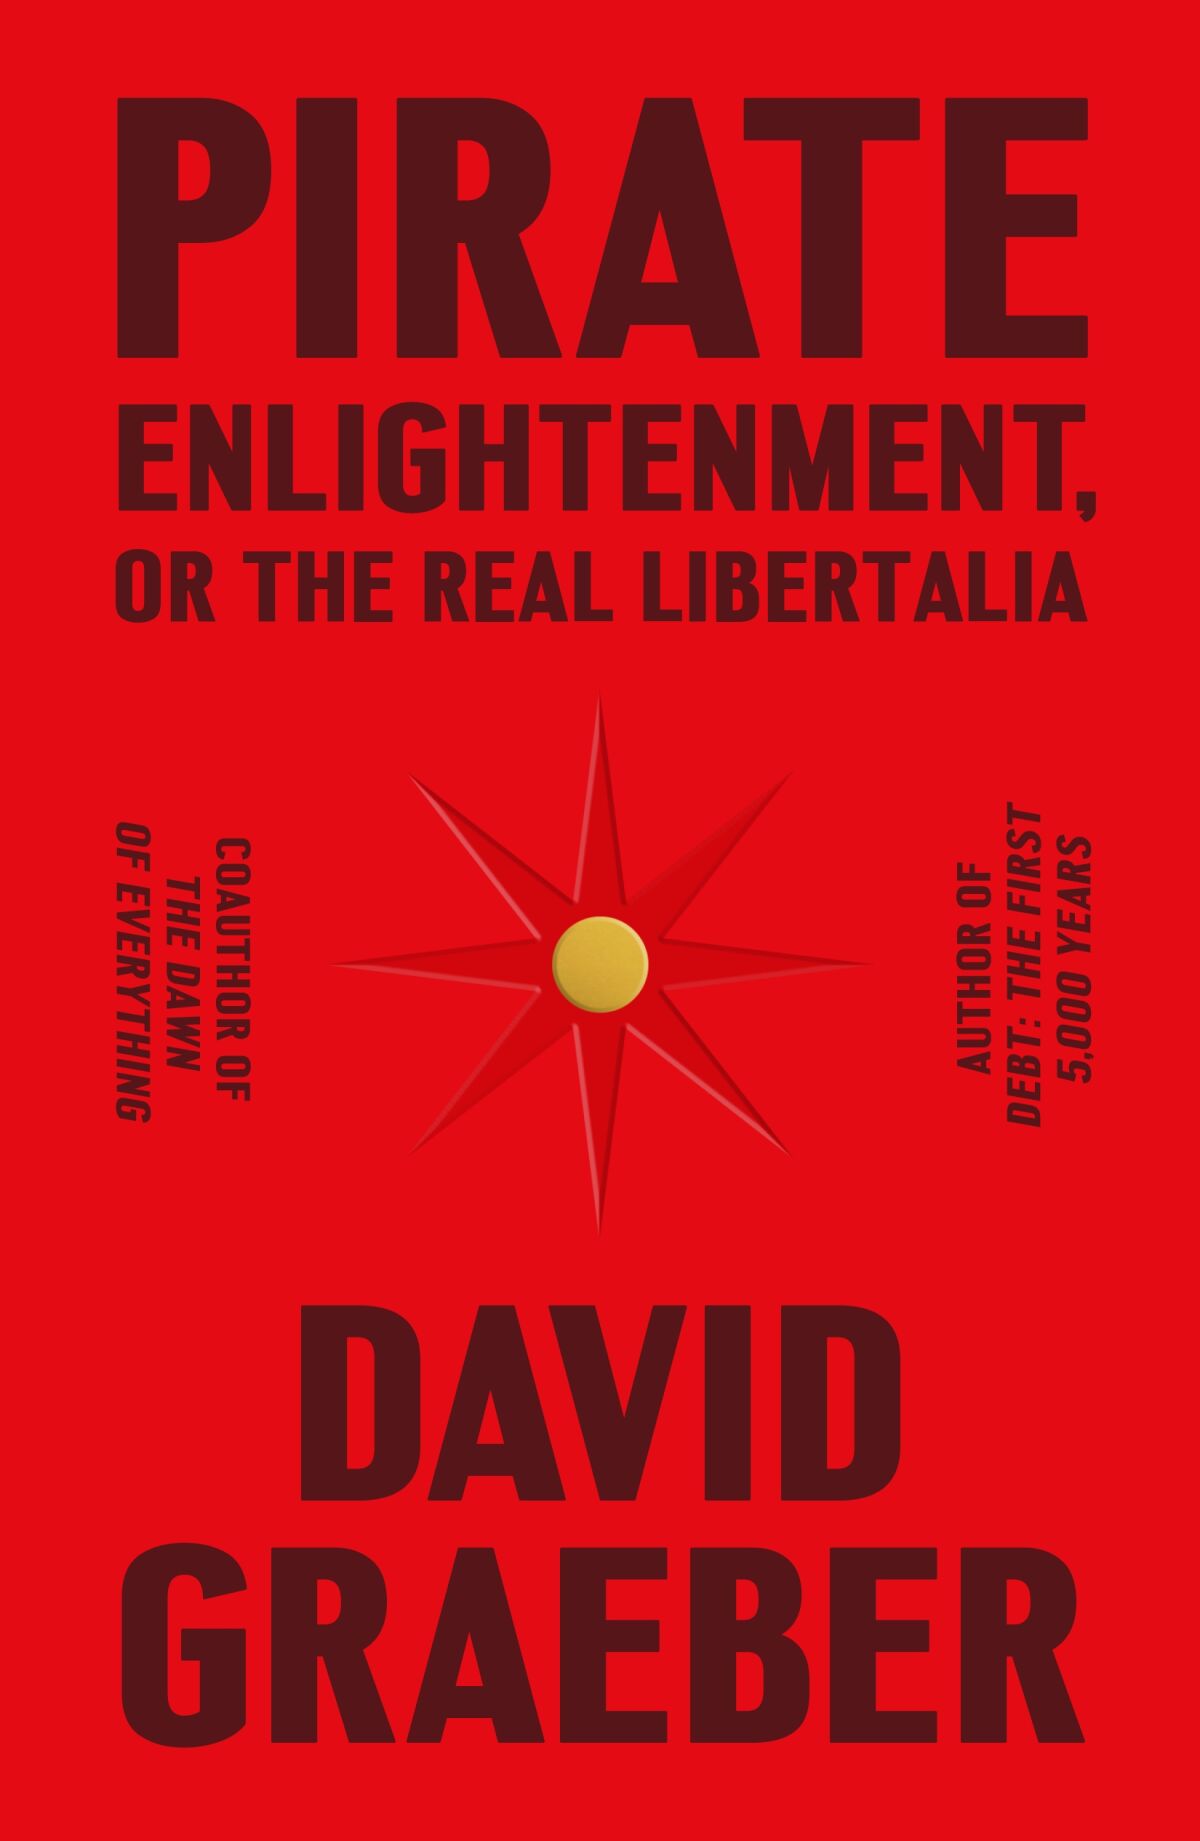 A book jacket of "Pirate Enlightenment" by David Graeber